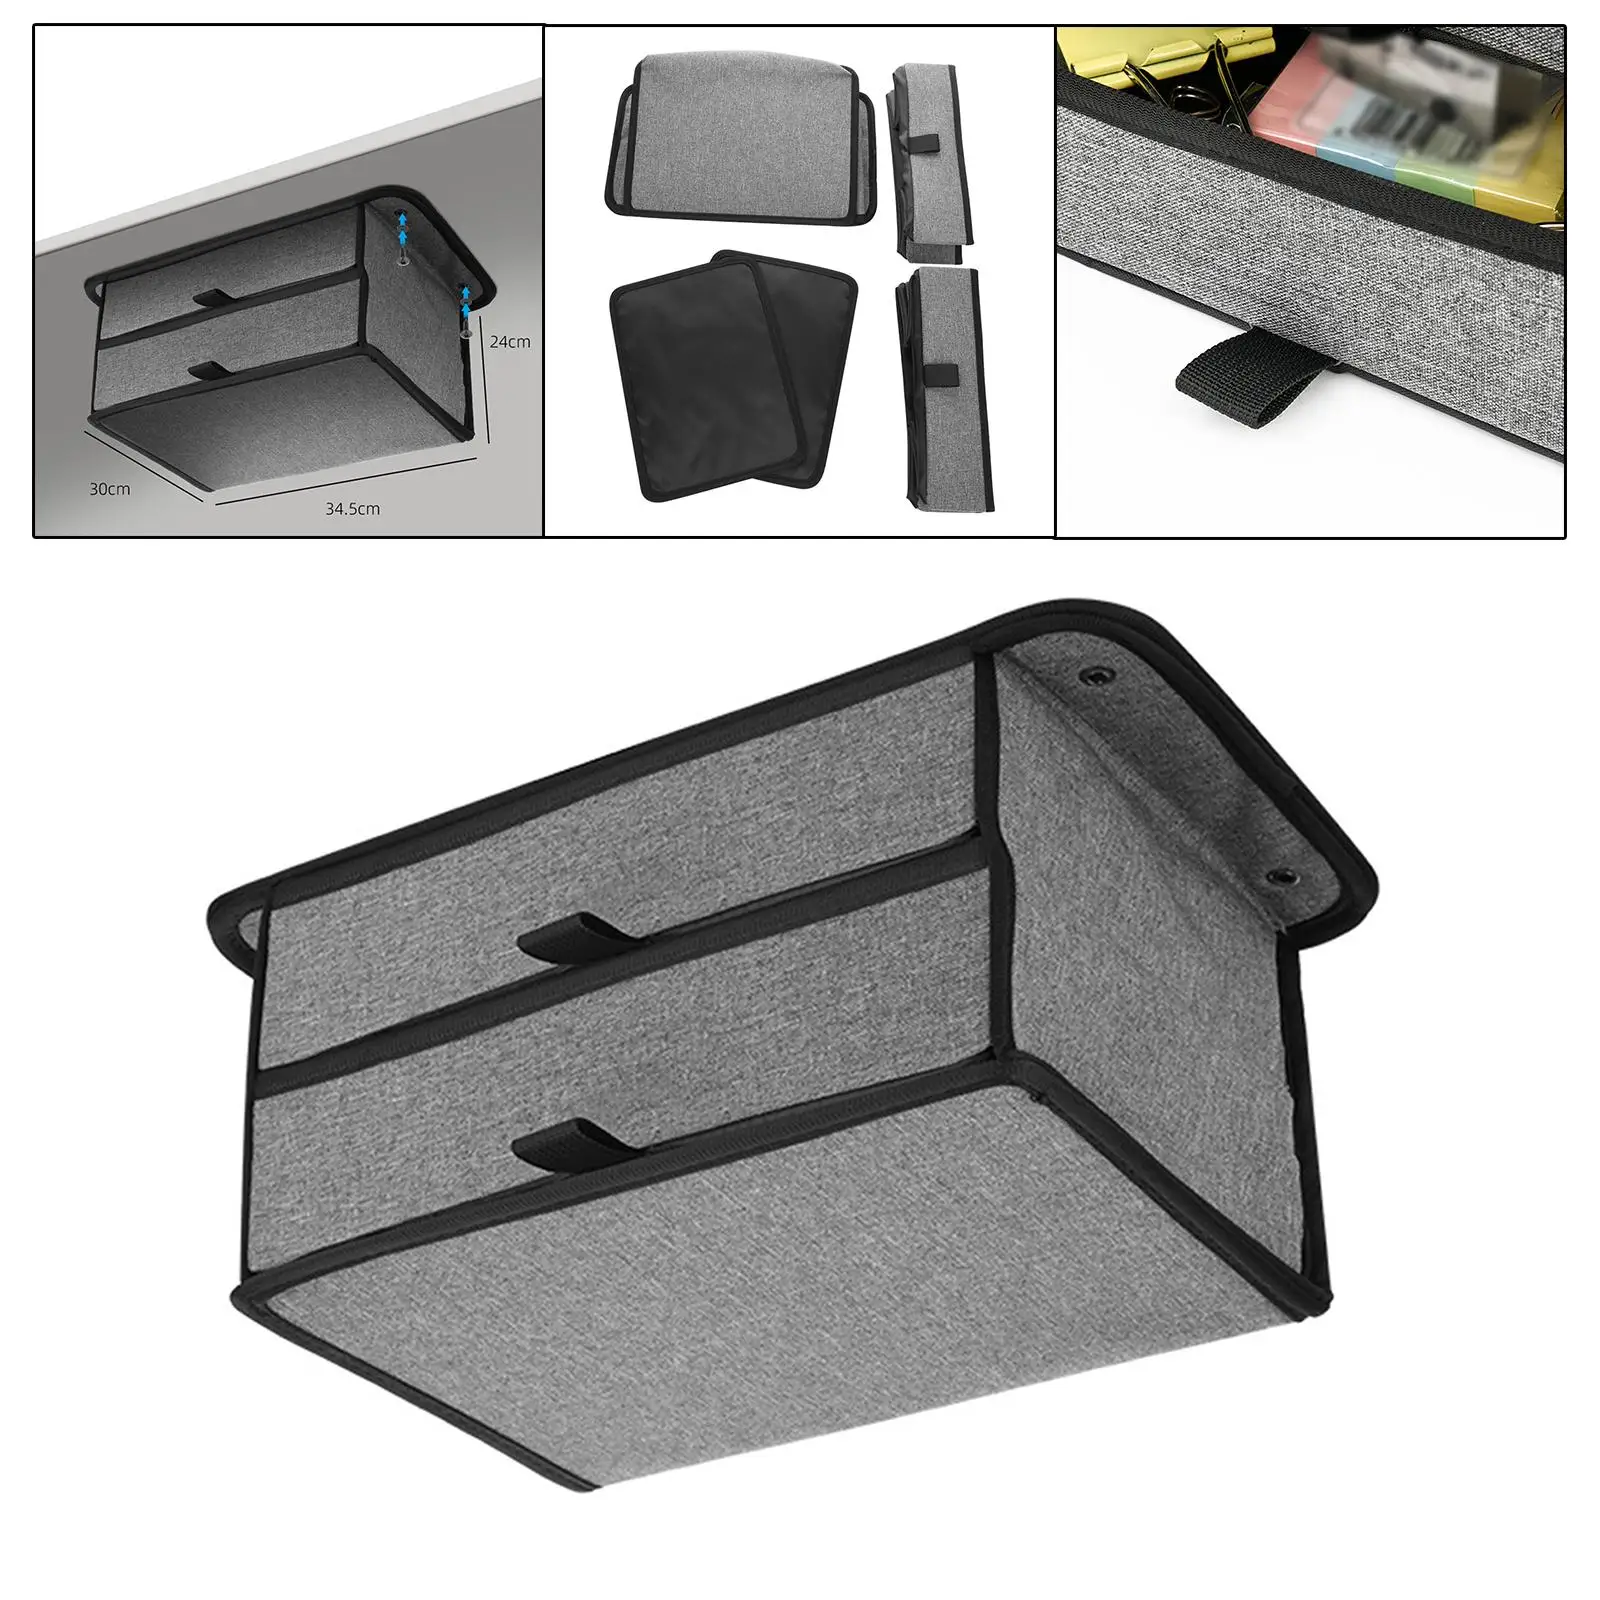 Hidden Stationery Classroom Folding 2 Layers Waterproof Large Capacity under Desk Storage Box Table Slide Out Storage Mounted